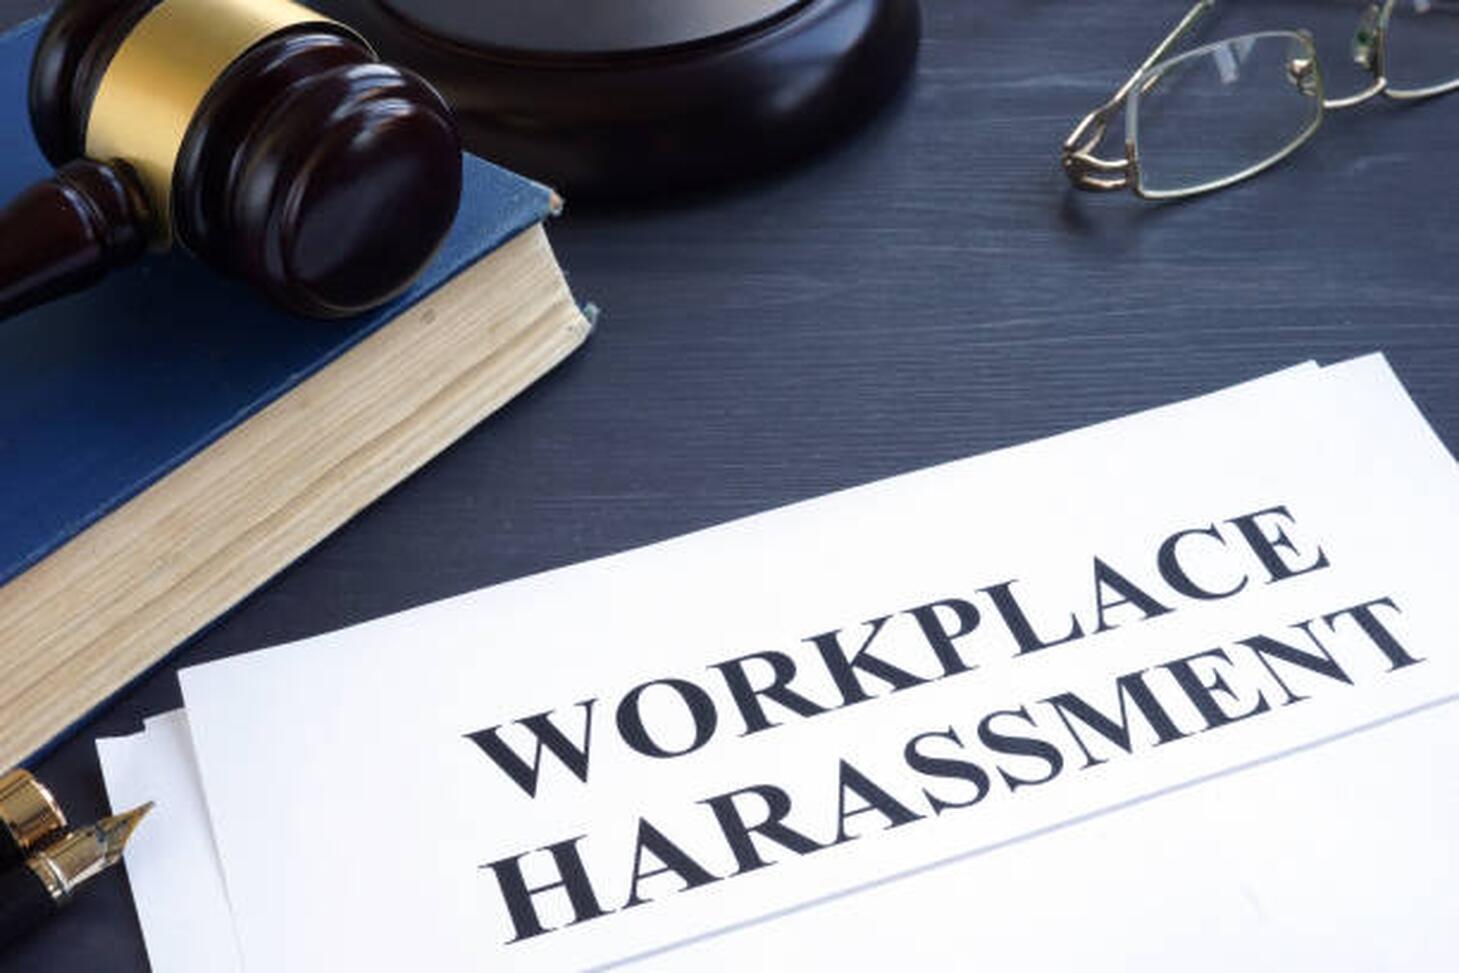 Documents about Workplace harassment in a court.